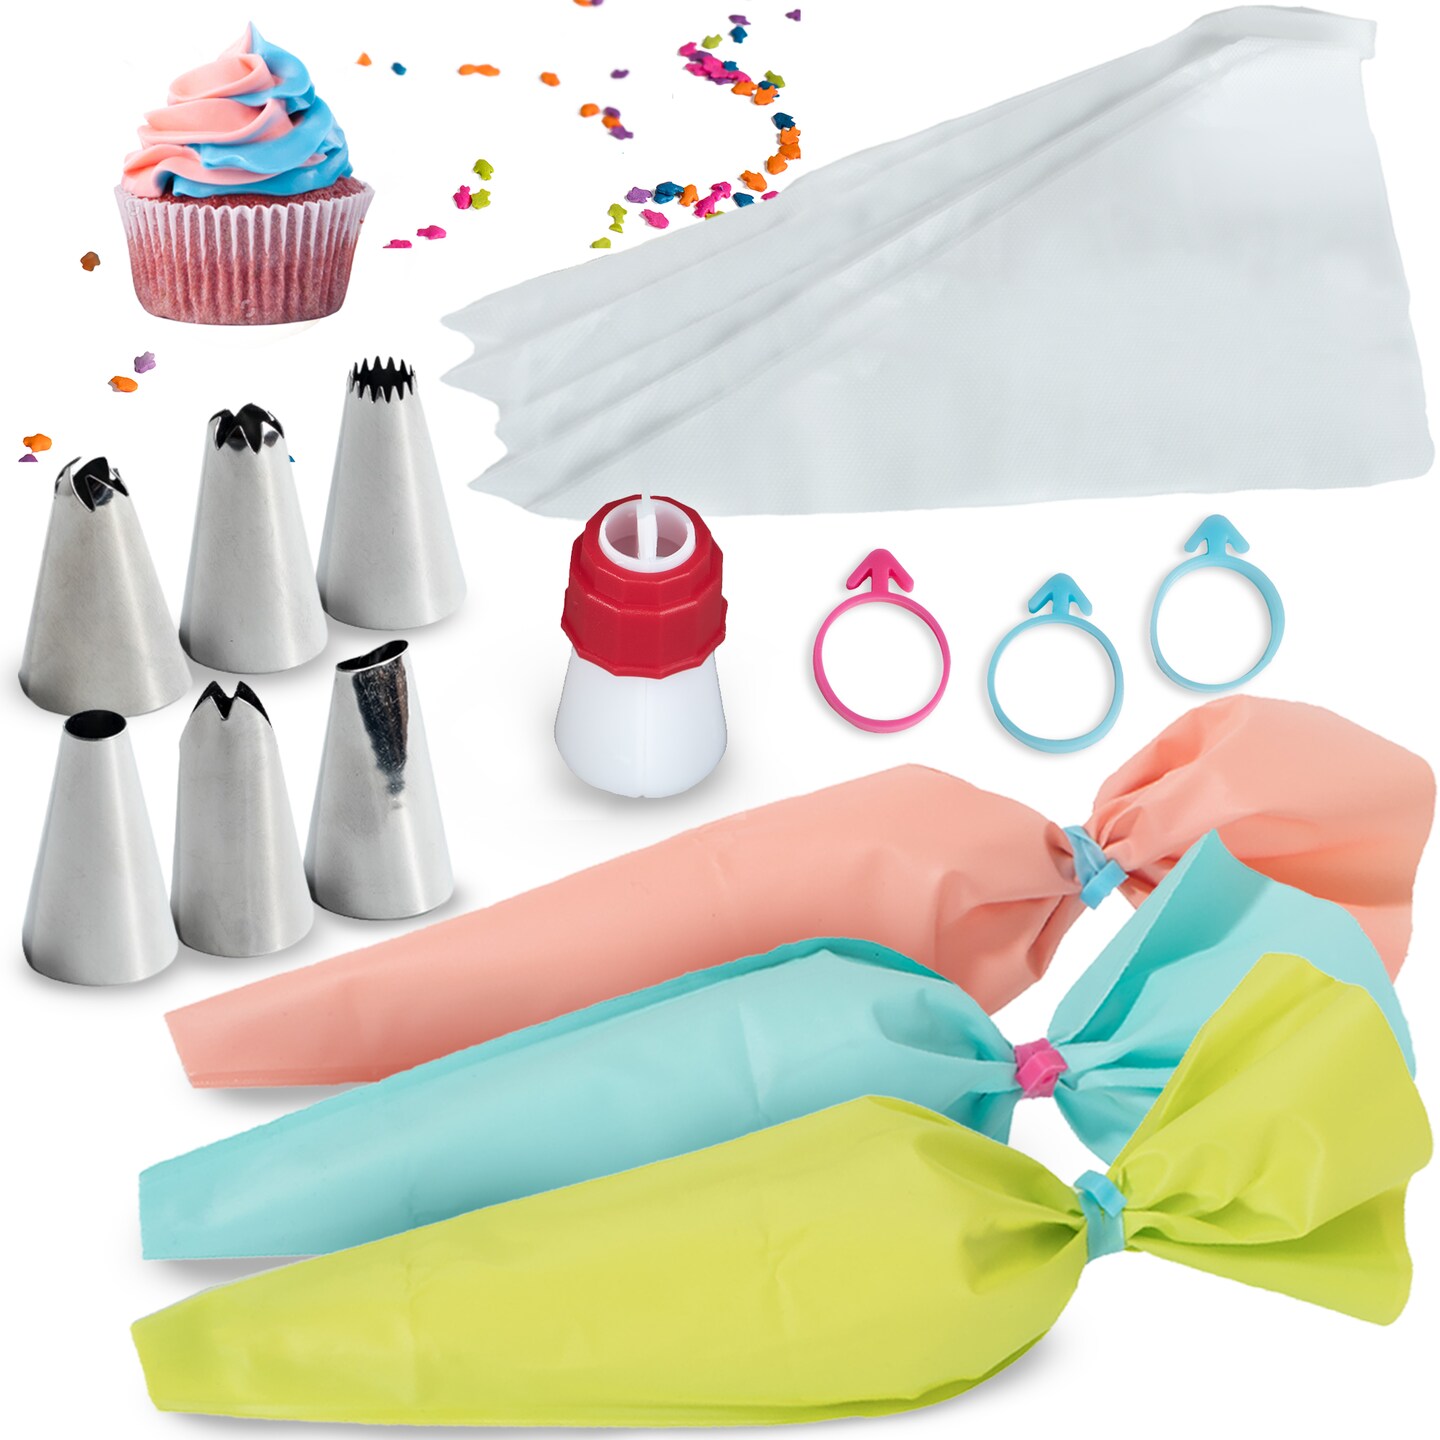 Baketivity 43-Piece Piping Set, Piping Bags and Tips Set with Reusable Piping Bags, Frosting Piping Bags and Tips - Duo-Color Coupler